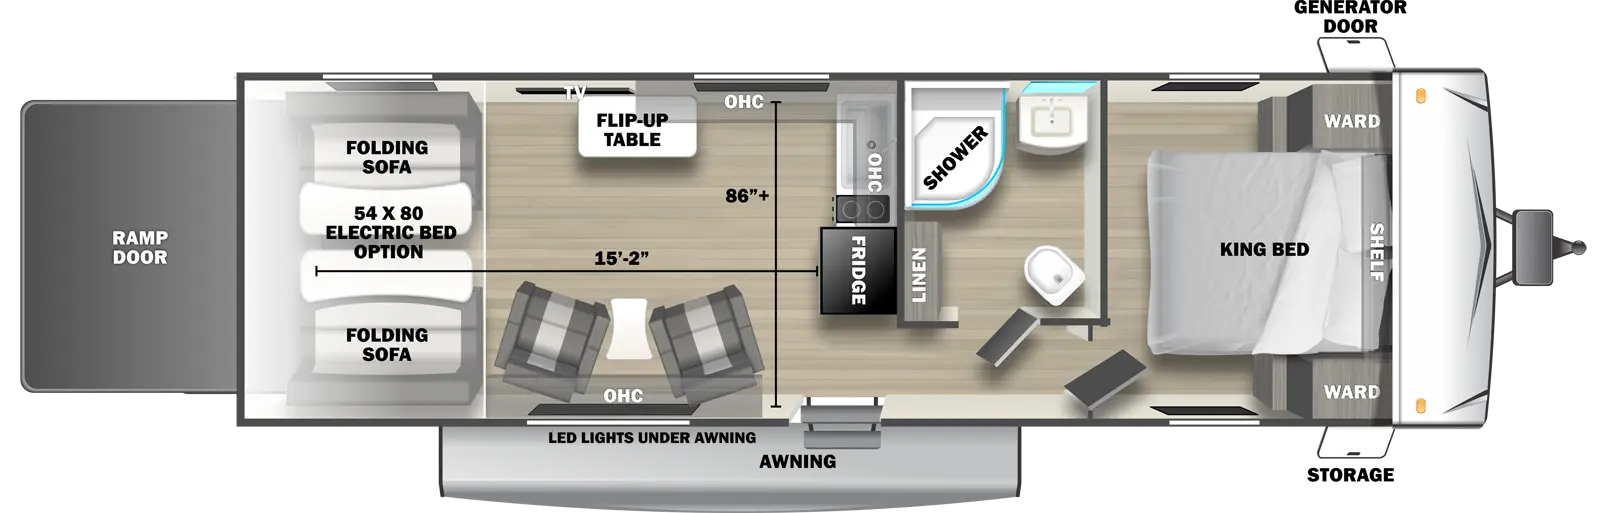 The 2750SRX travel trailer has no slide outs, 1 entry door and 1 rear ramp door. Exterior features include an awning with LED lights, front door side storage and front off-door side generator door. Interior layout from front to back includes: front bedroom with foot-facing King bed, shelf over the bed, and front corner wardrobes; off-door side bathroom with shower, linen storage, toilet and single sink vanity; rear facing kitchen countertop with sink, overhead cabinet, stove top and rear facing refrigerator; overhead cabinet continues to off-door side; off-door side TV with flip-up table; 2 door side recliners with end table; and rear 54 x 80 electric bed option over electric pass-through dinette. Cargo length from rear of unit to refrigerator is 15 ft. 2 in. Cargo width from wall to wall is is 86 inches.